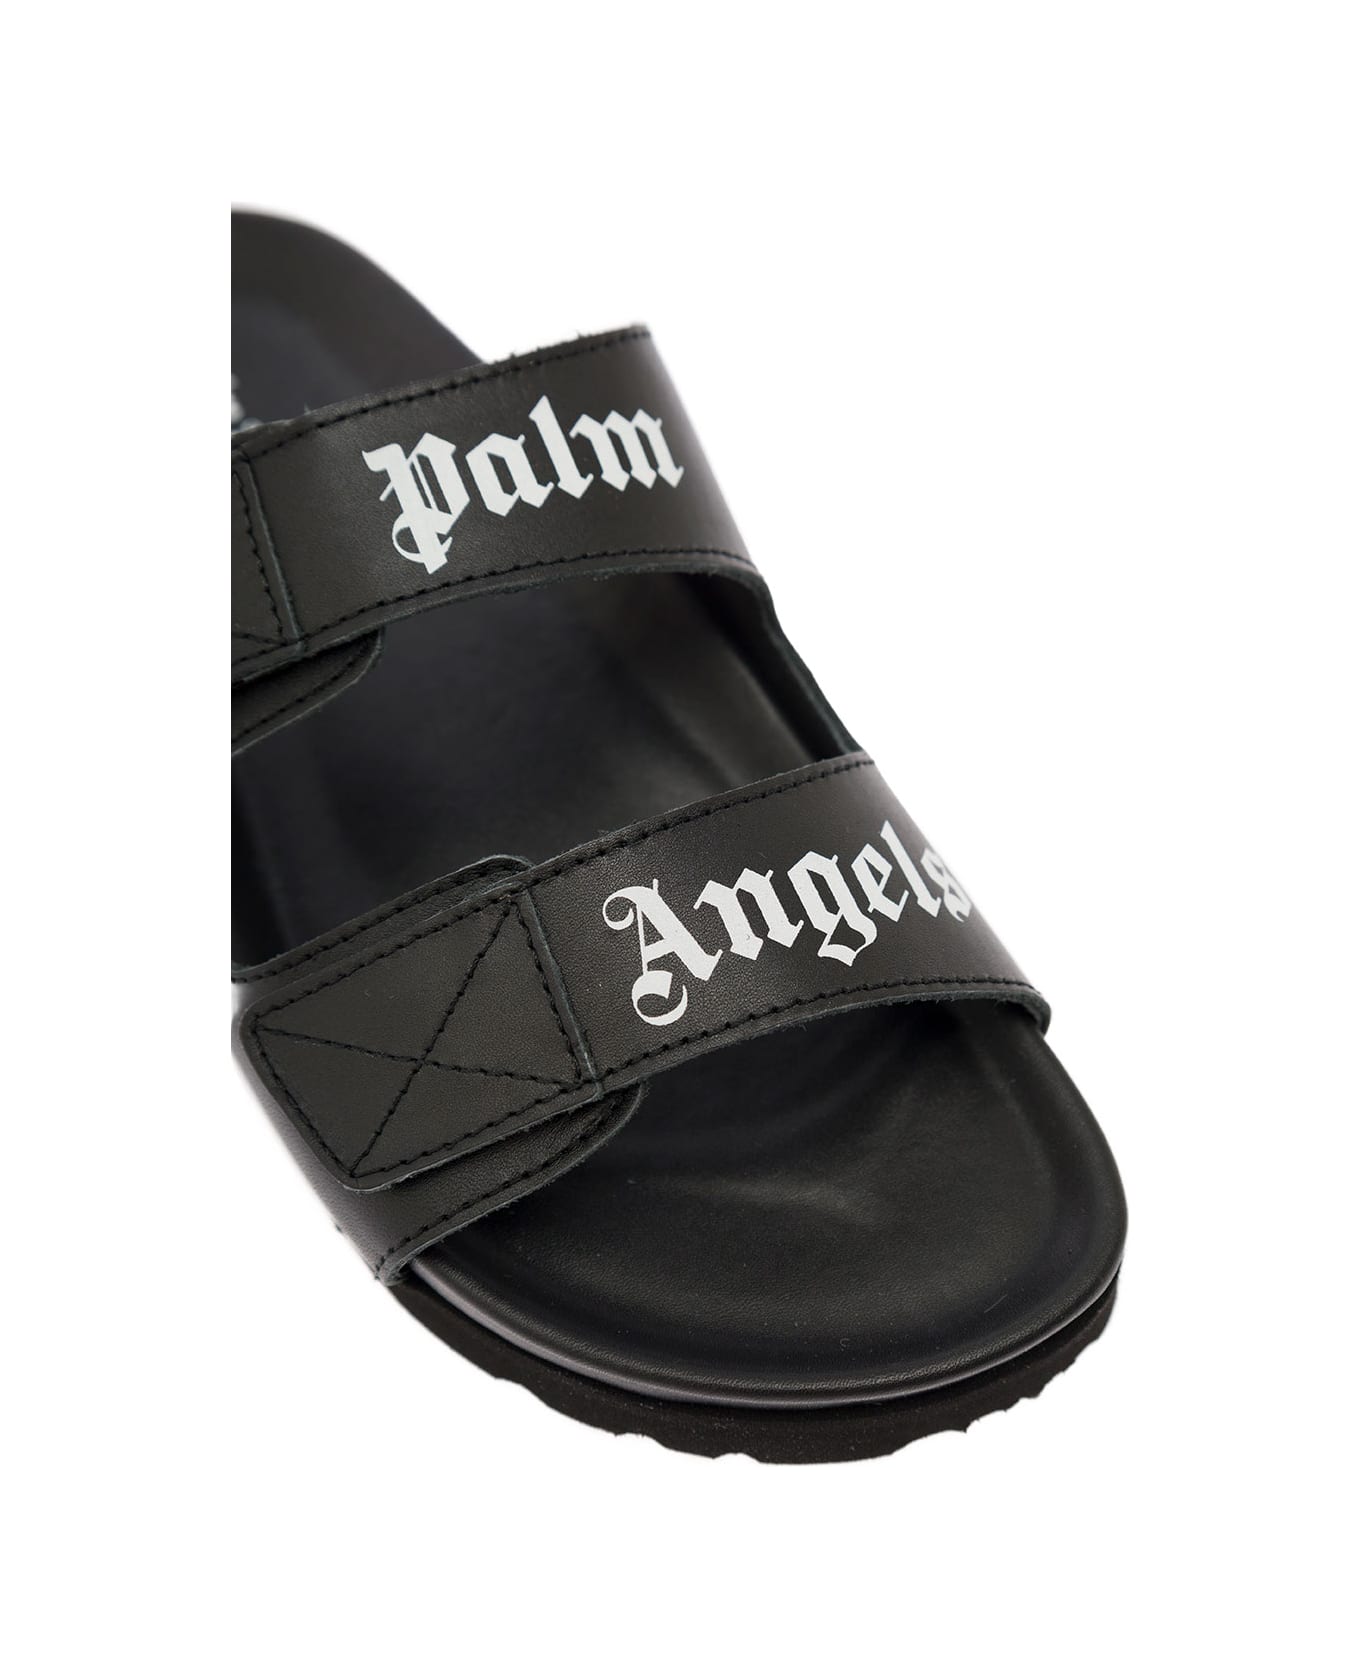 Palm Angels Slides With Logo And Touch Strap In Black Leather Woman - Black